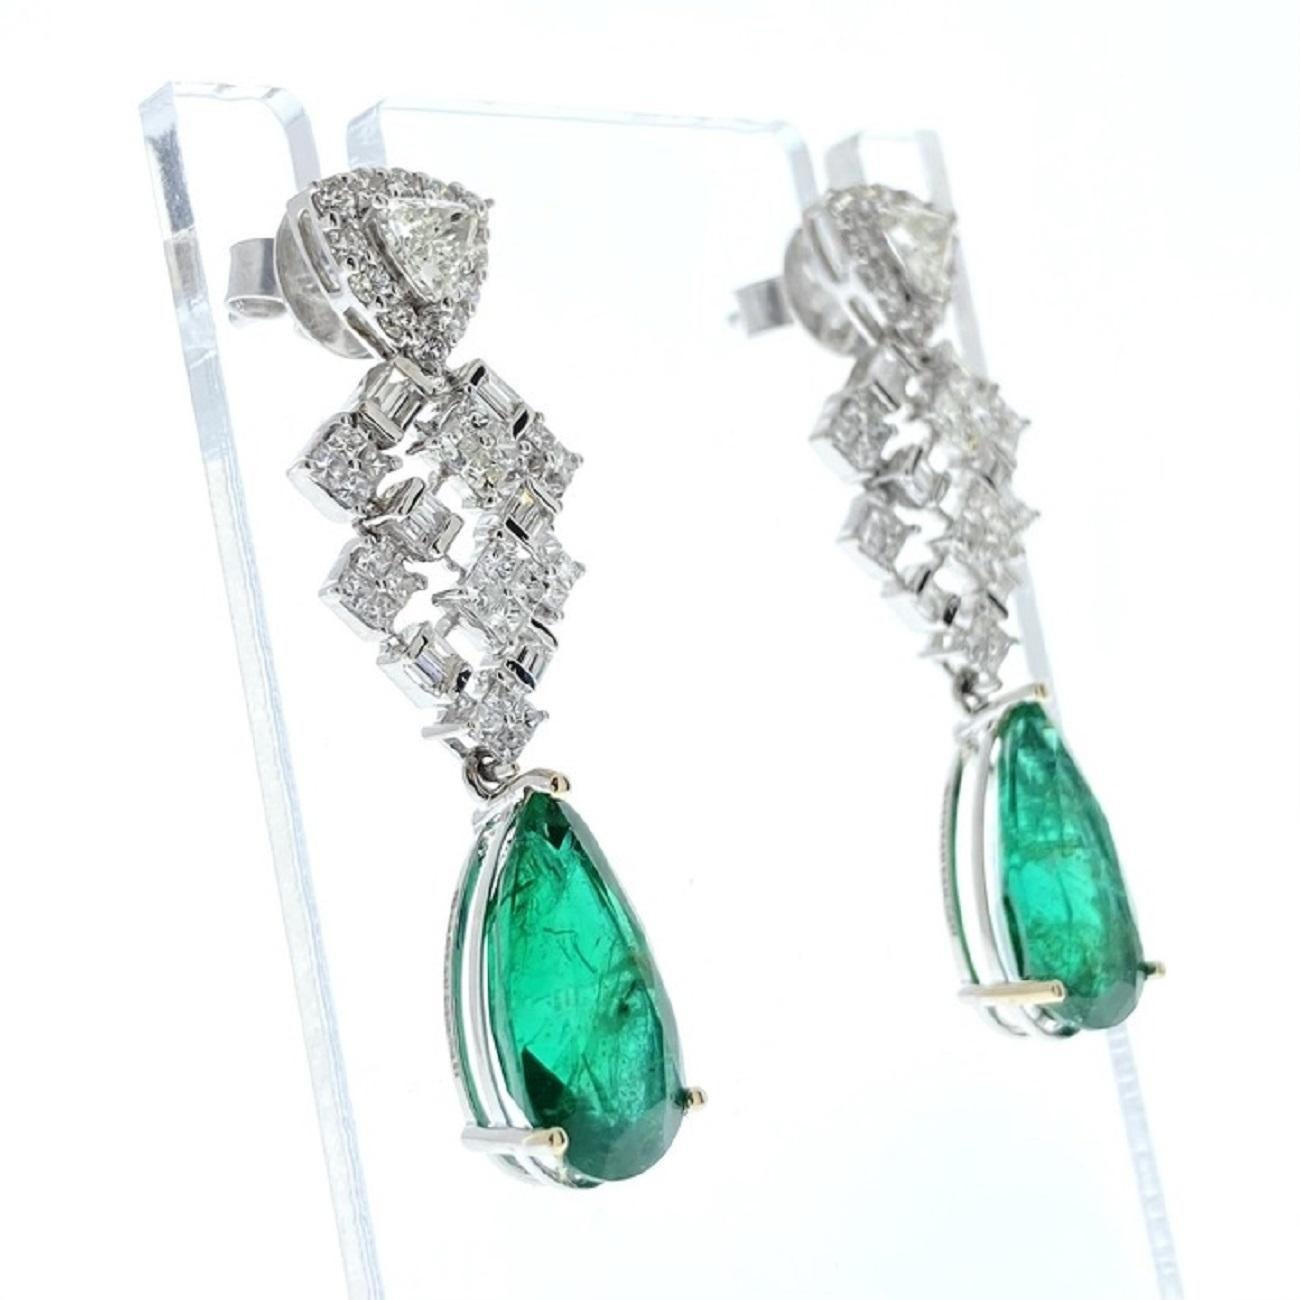 A pair of fashion earrings featuring a pear-shaped emerald as the main stone, with a substantial weight of 8.24 carats. The emerald exhibits a green color, which is a characteristic and highly desirable feature in emeralds. The setting for these